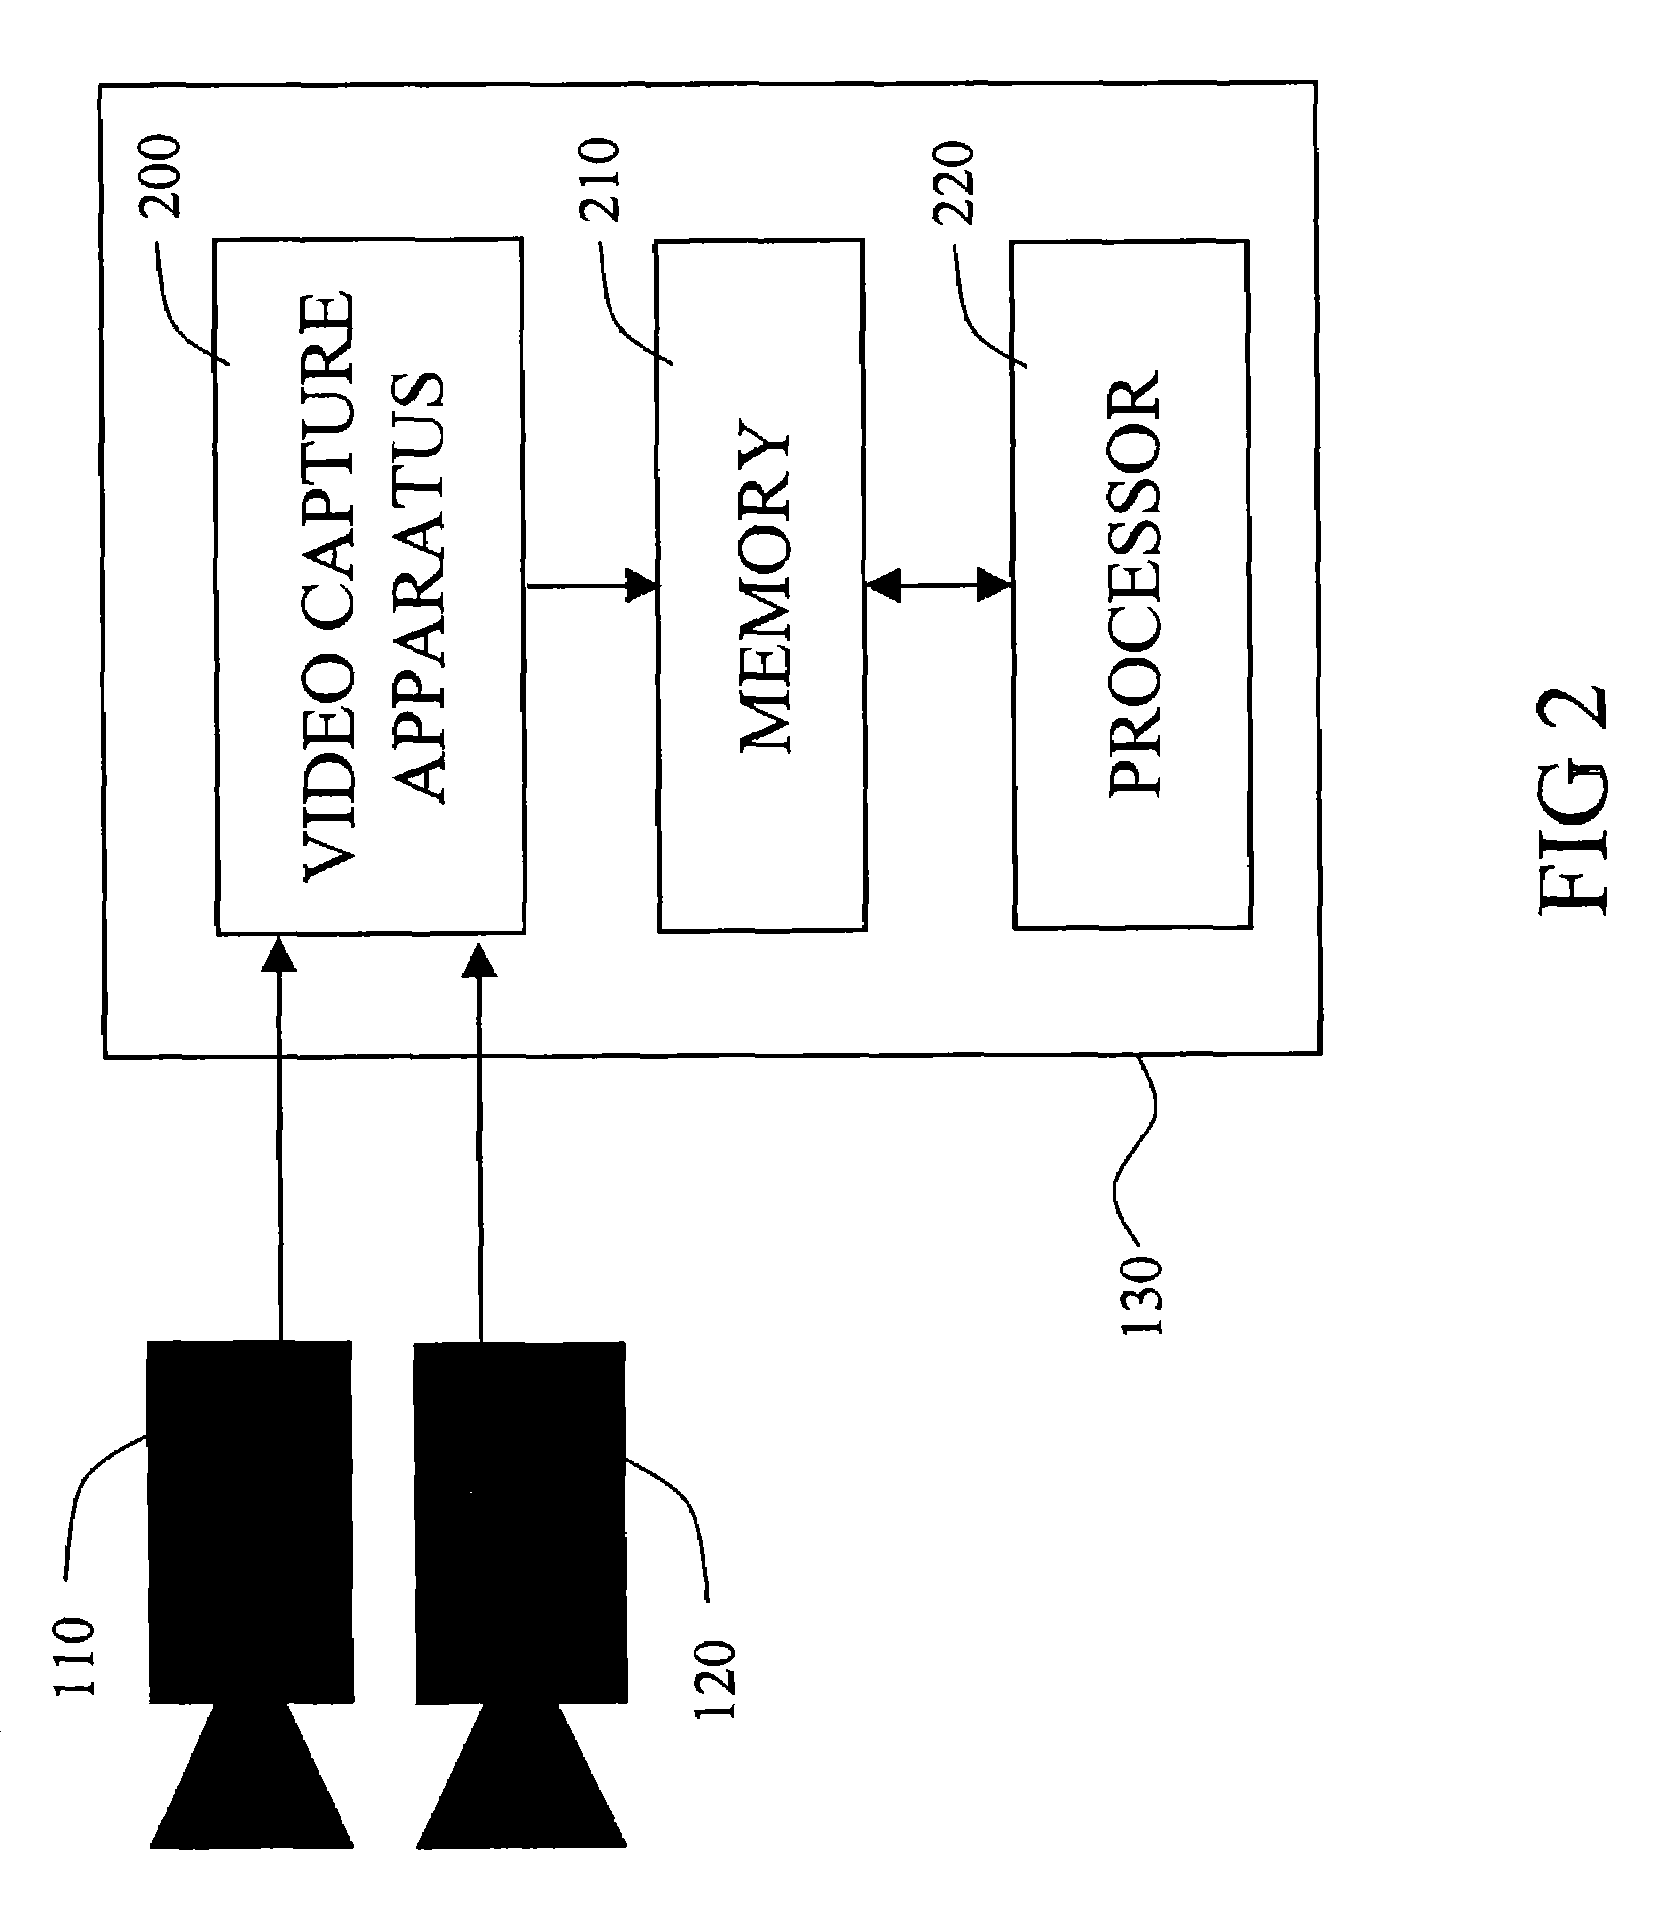 Method and apparatus for robustly tracking objects